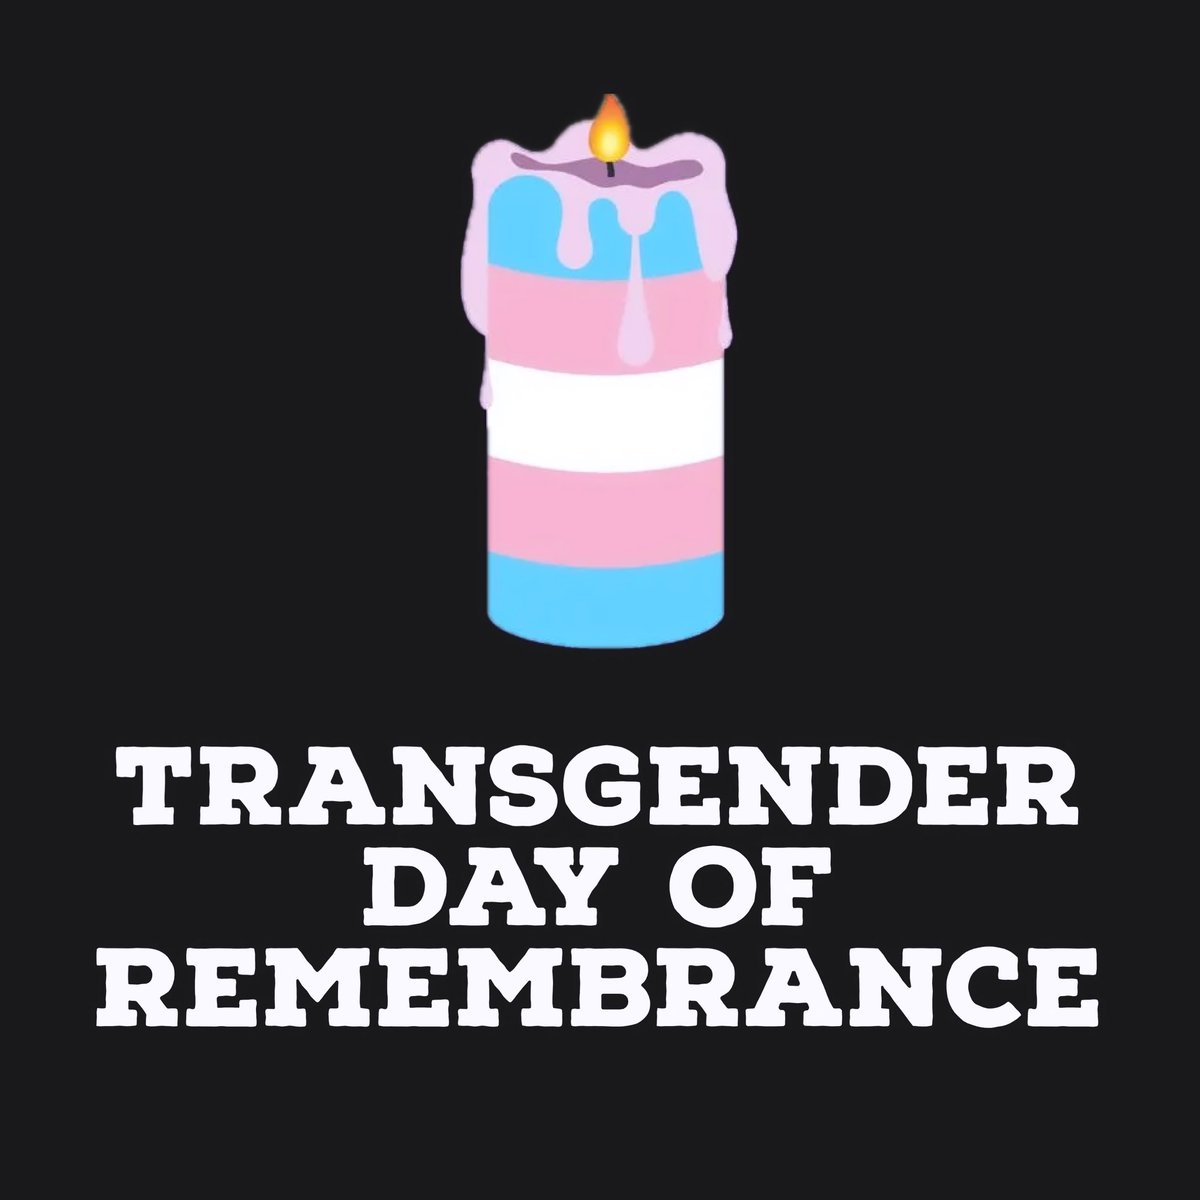 On #transdayofremembrance we publicly mourn and honor the trans lives lost. We raise awareness and we fight back against trans hate. We see you, we love you, & we support you. #trans #TransRightsAreHumanRights